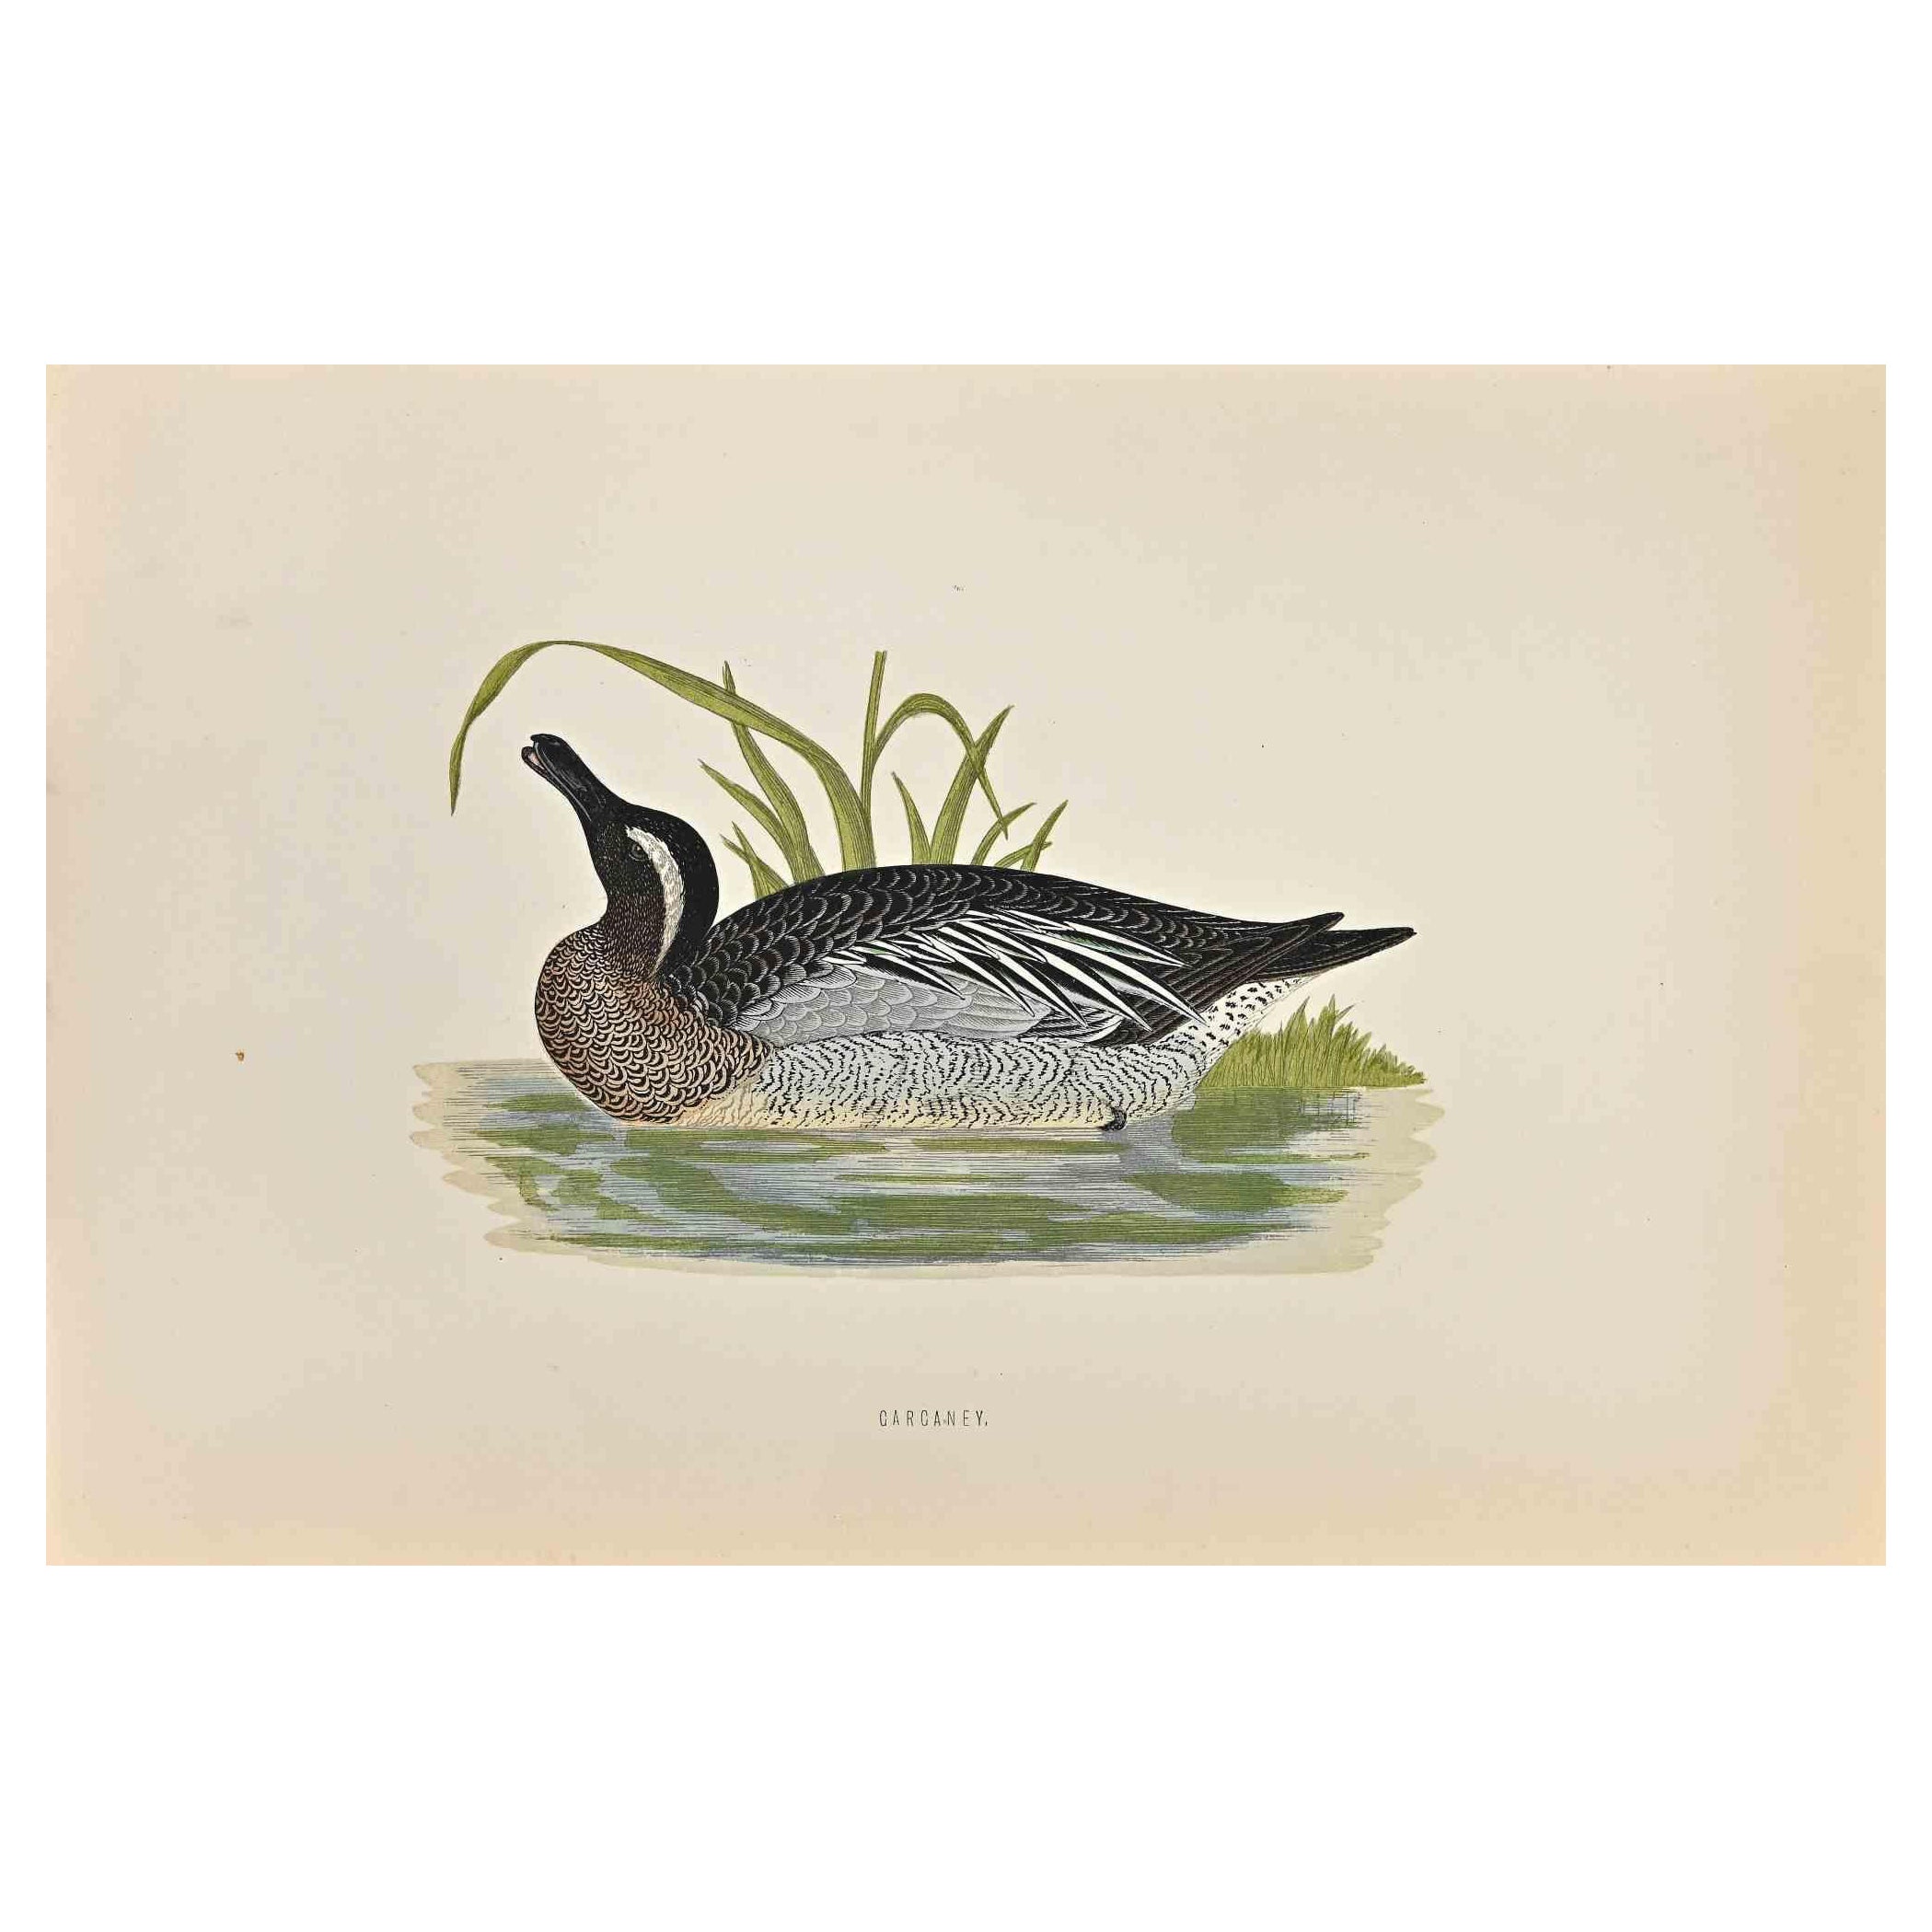 Garganey is a modern artwork realized in 1870 by the British artist Alexander Francis Lydon (1836-1917).

Woodcut print on ivory-colored paper.

Hand-colored, published by London, Bell & Sons, 1870.  

The name of the bird is printed on the plate.